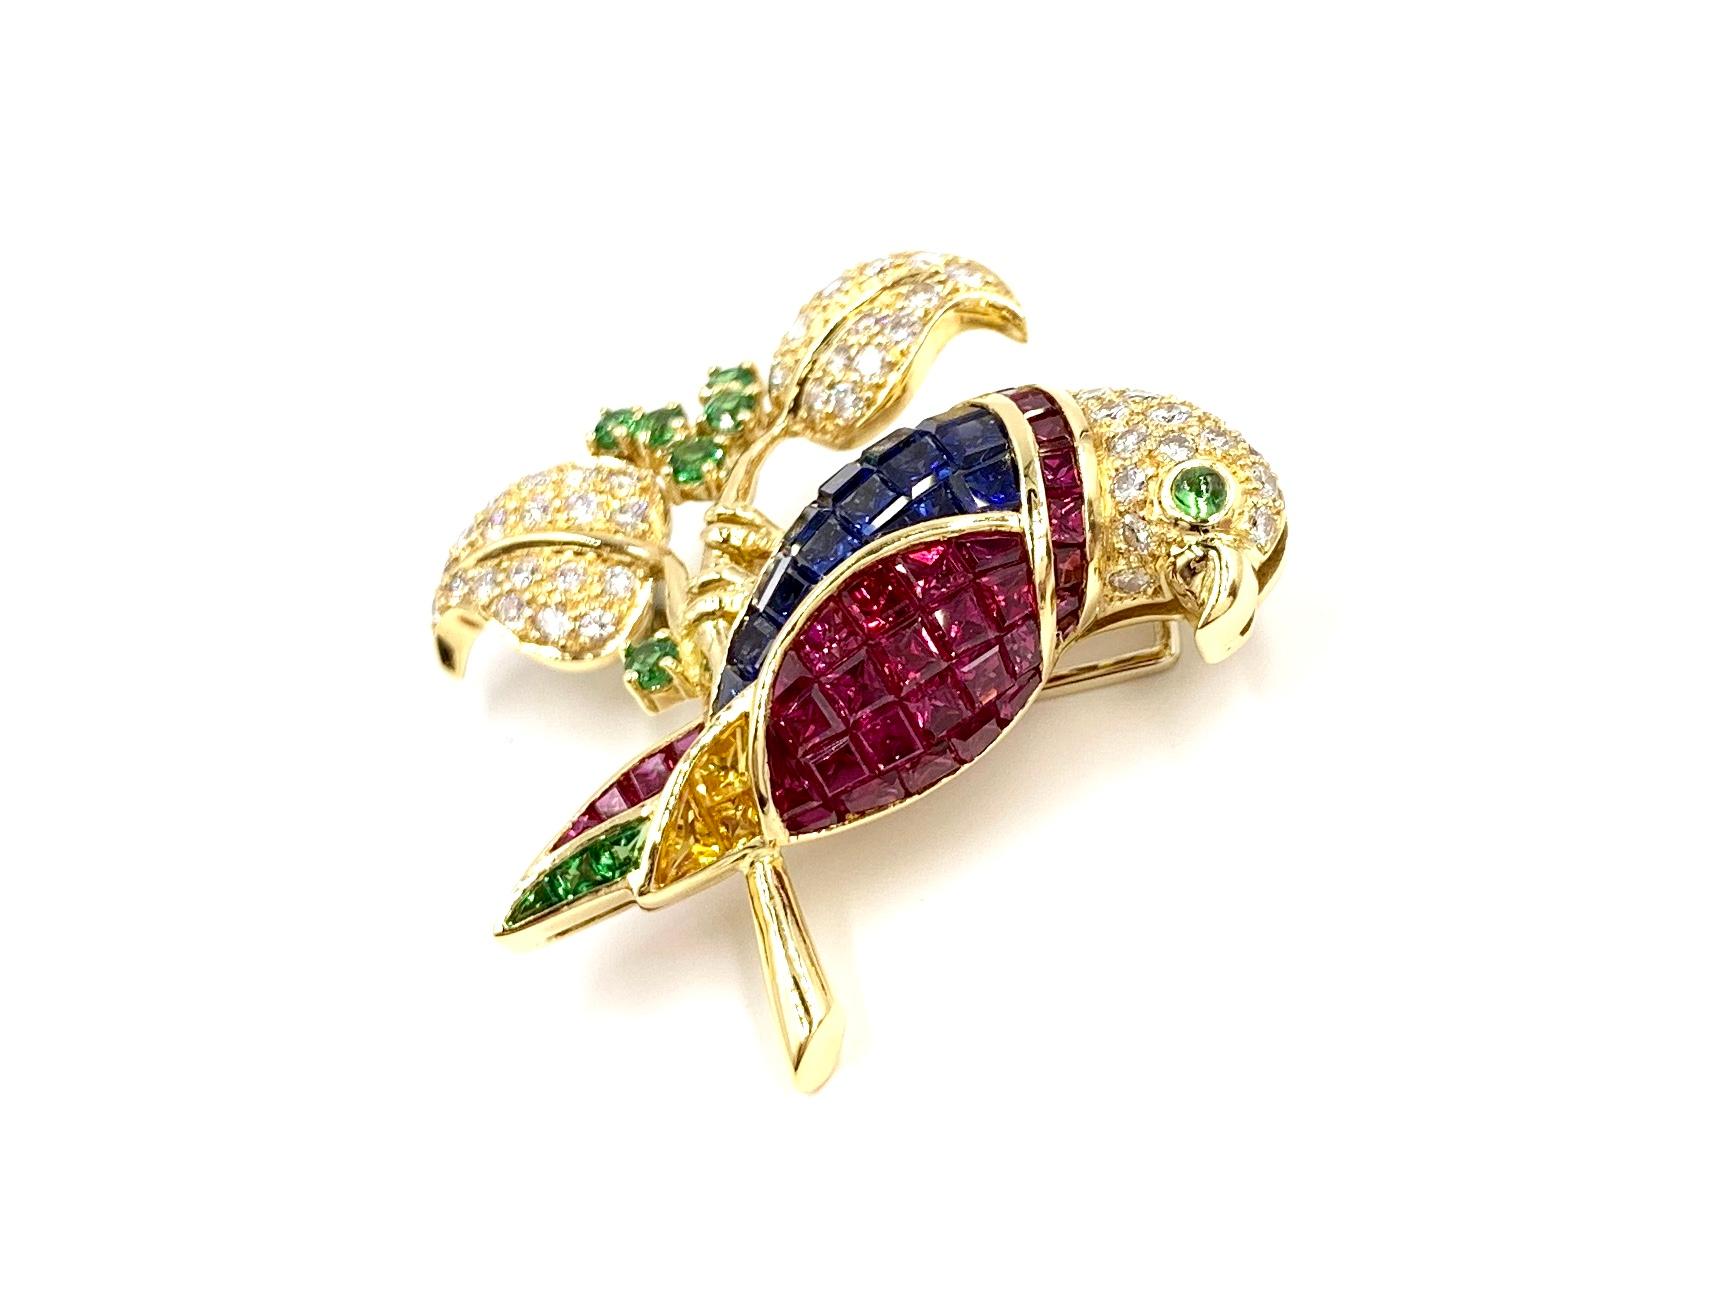 18 Karat Diamond and Gemstone Parrot Brooch In Excellent Condition For Sale In Pikesville, MD